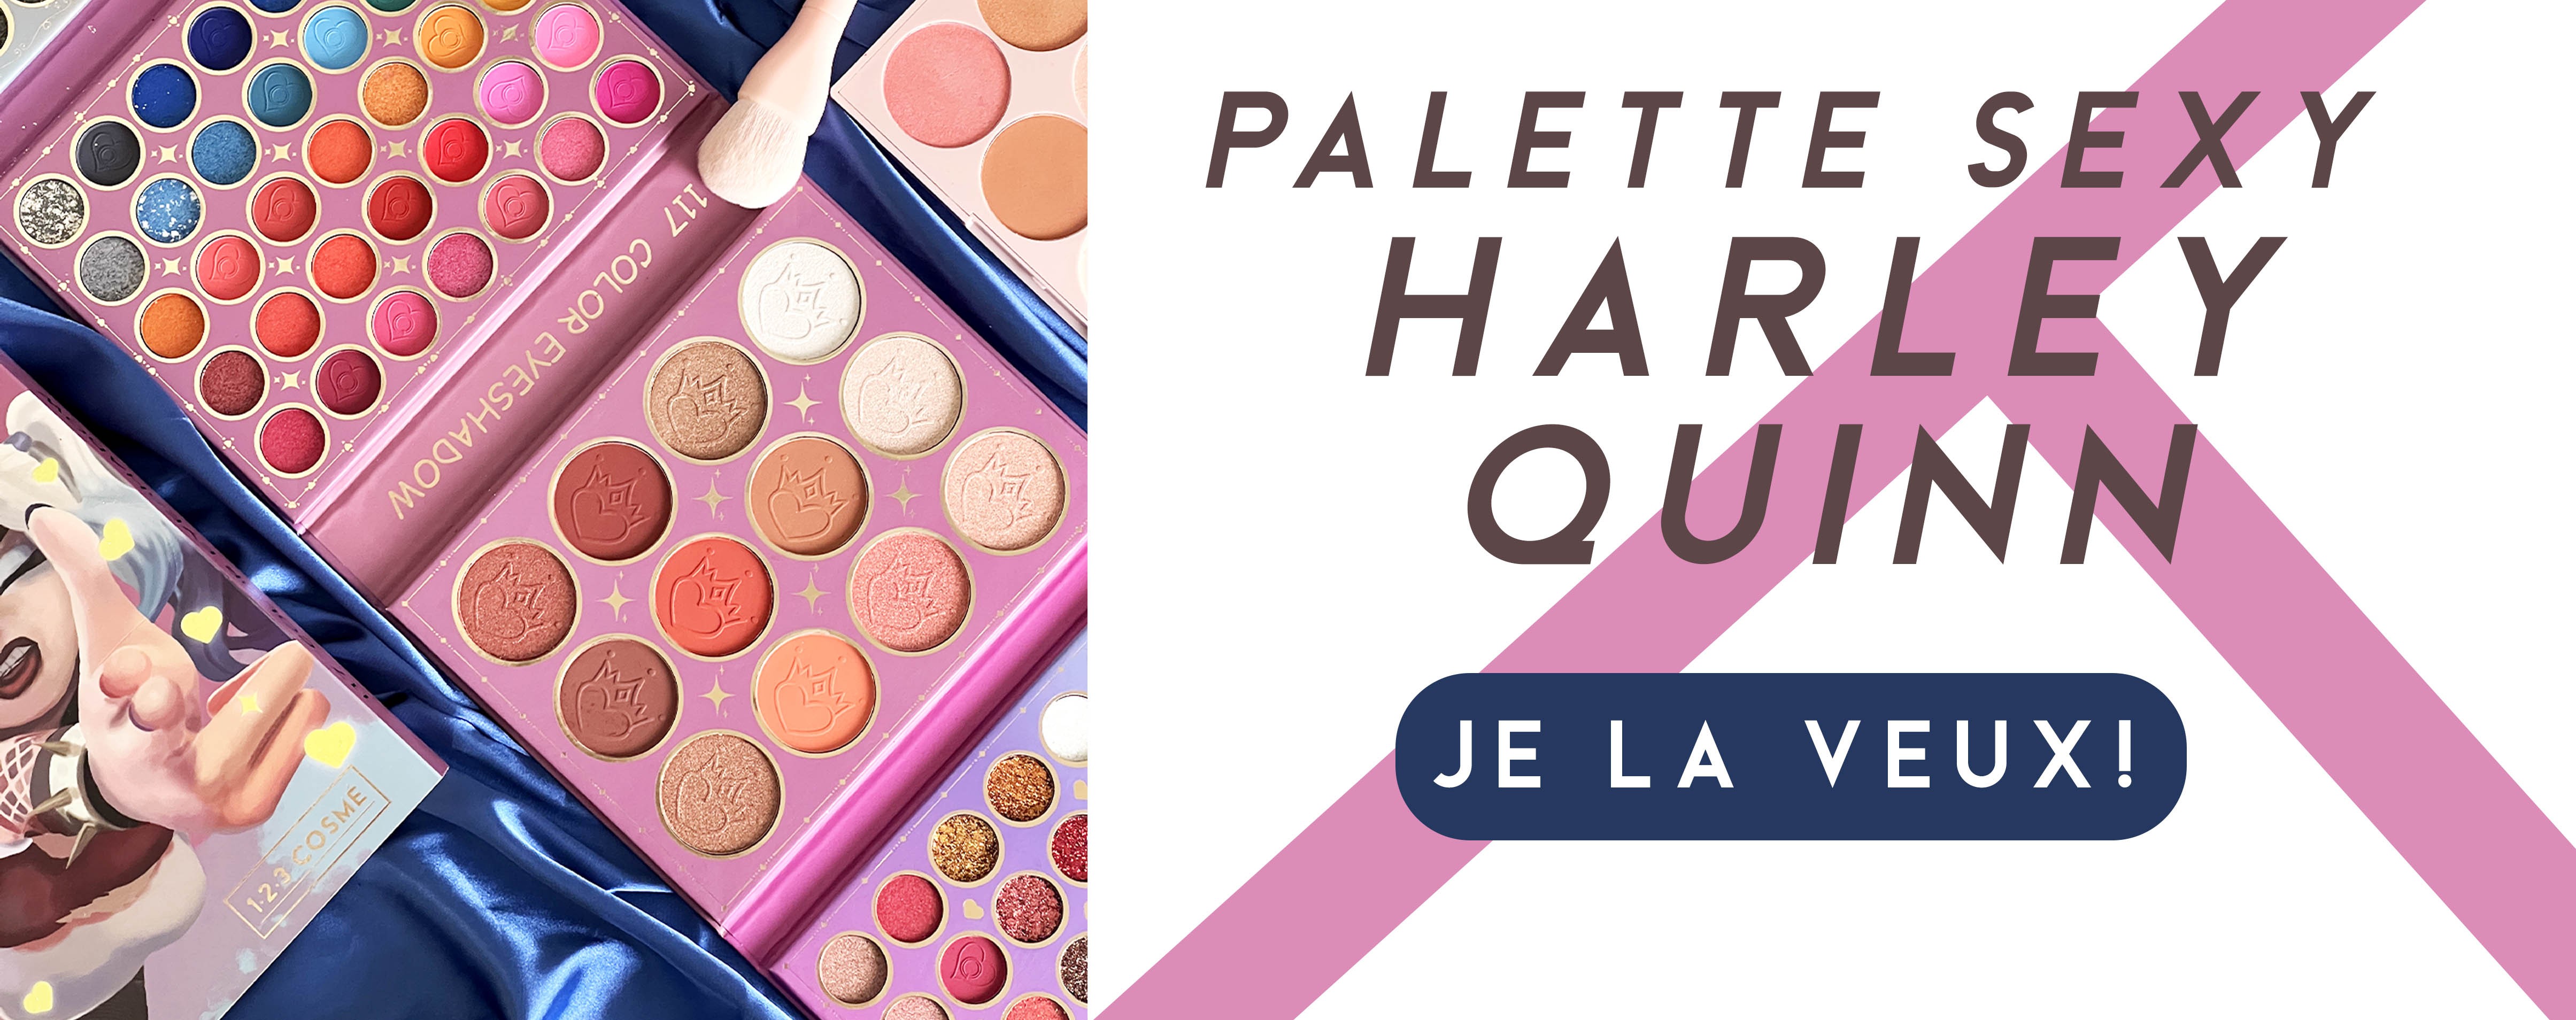 Palette Sexy Harley Quinn - Maquillage pas cher - 123 Cosmé